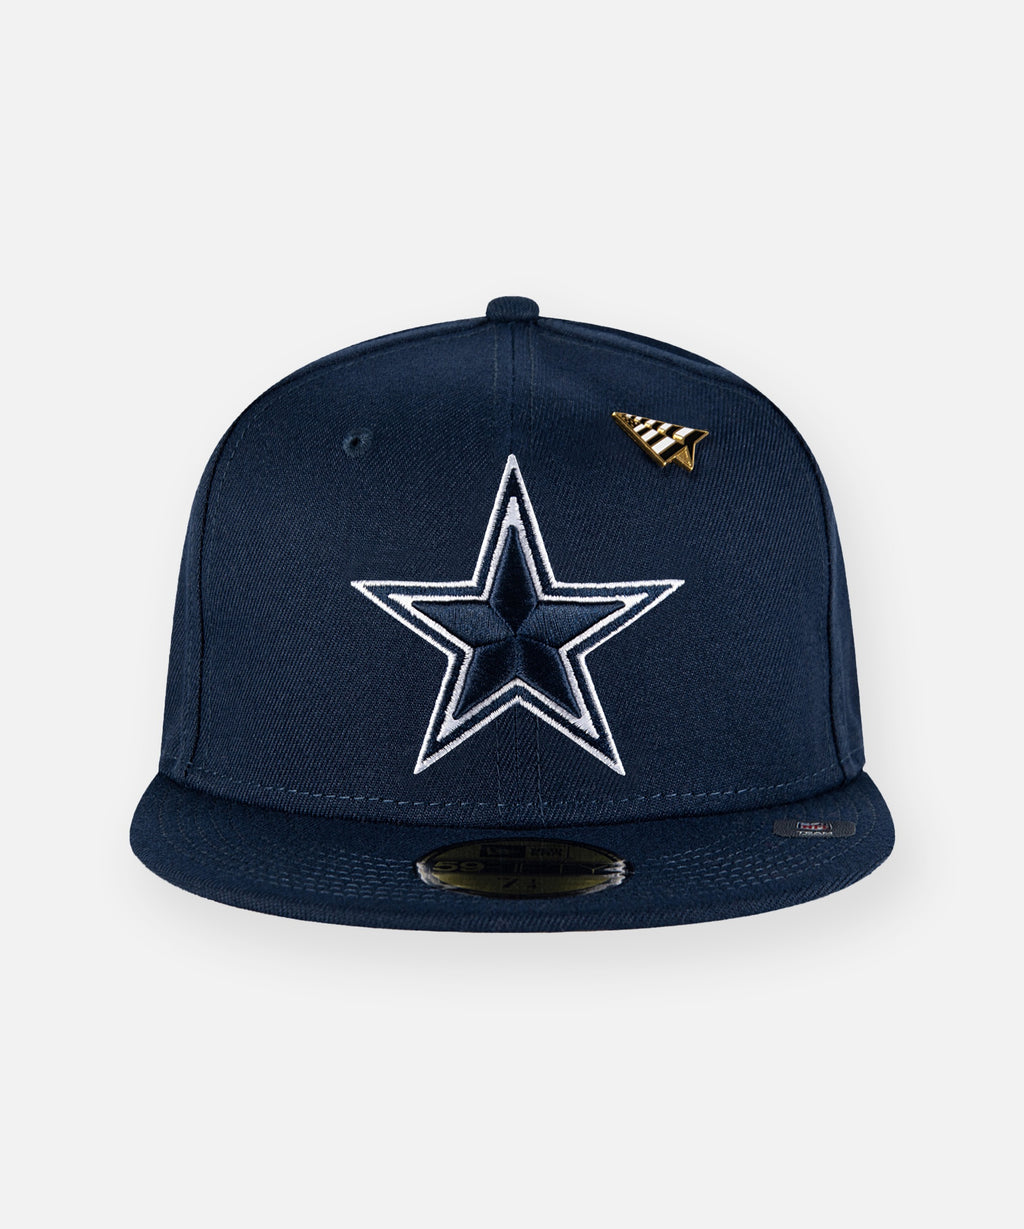 Paper Planes x Dallas Cowboys Team Color 59Fifty Fitted Hat